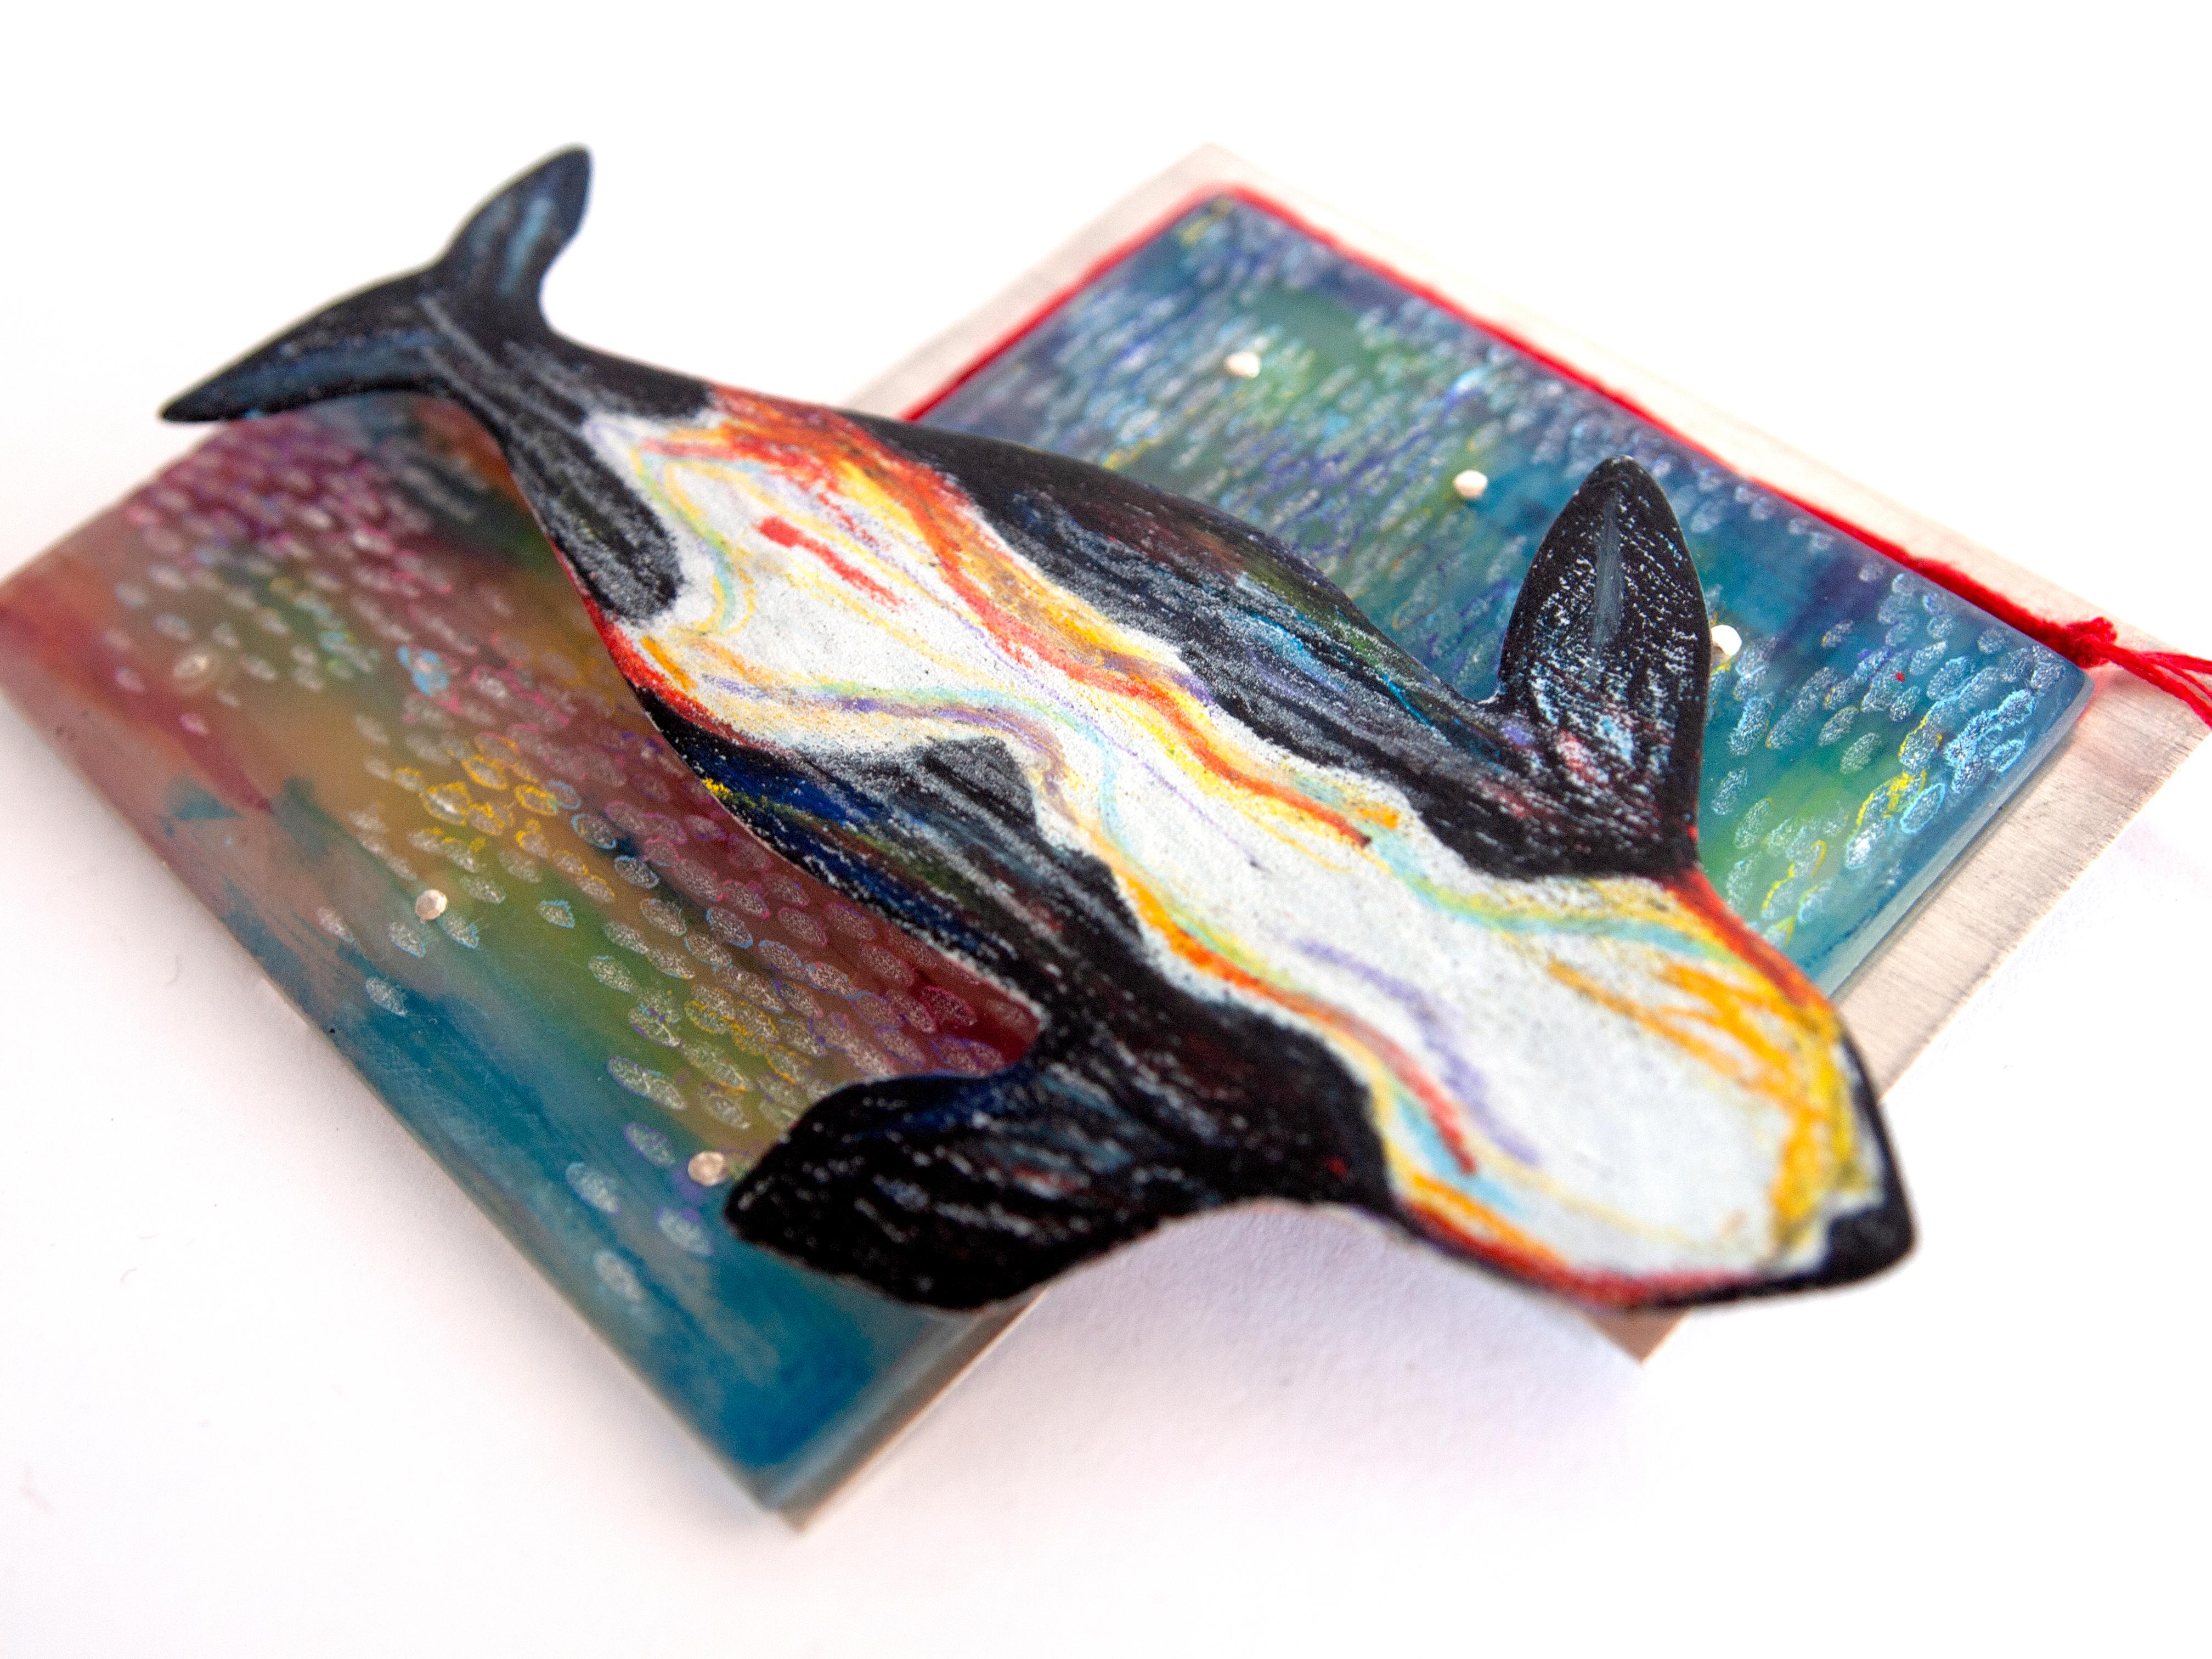 'Whales in the Theater' brooch, based on a narrative poem and sketch study painting created by the artist, this one-of-a-kind brooch is loaded with symbolism and meaning.  

Layers of Sterling Silver, hand textured/painted resin, as well as color